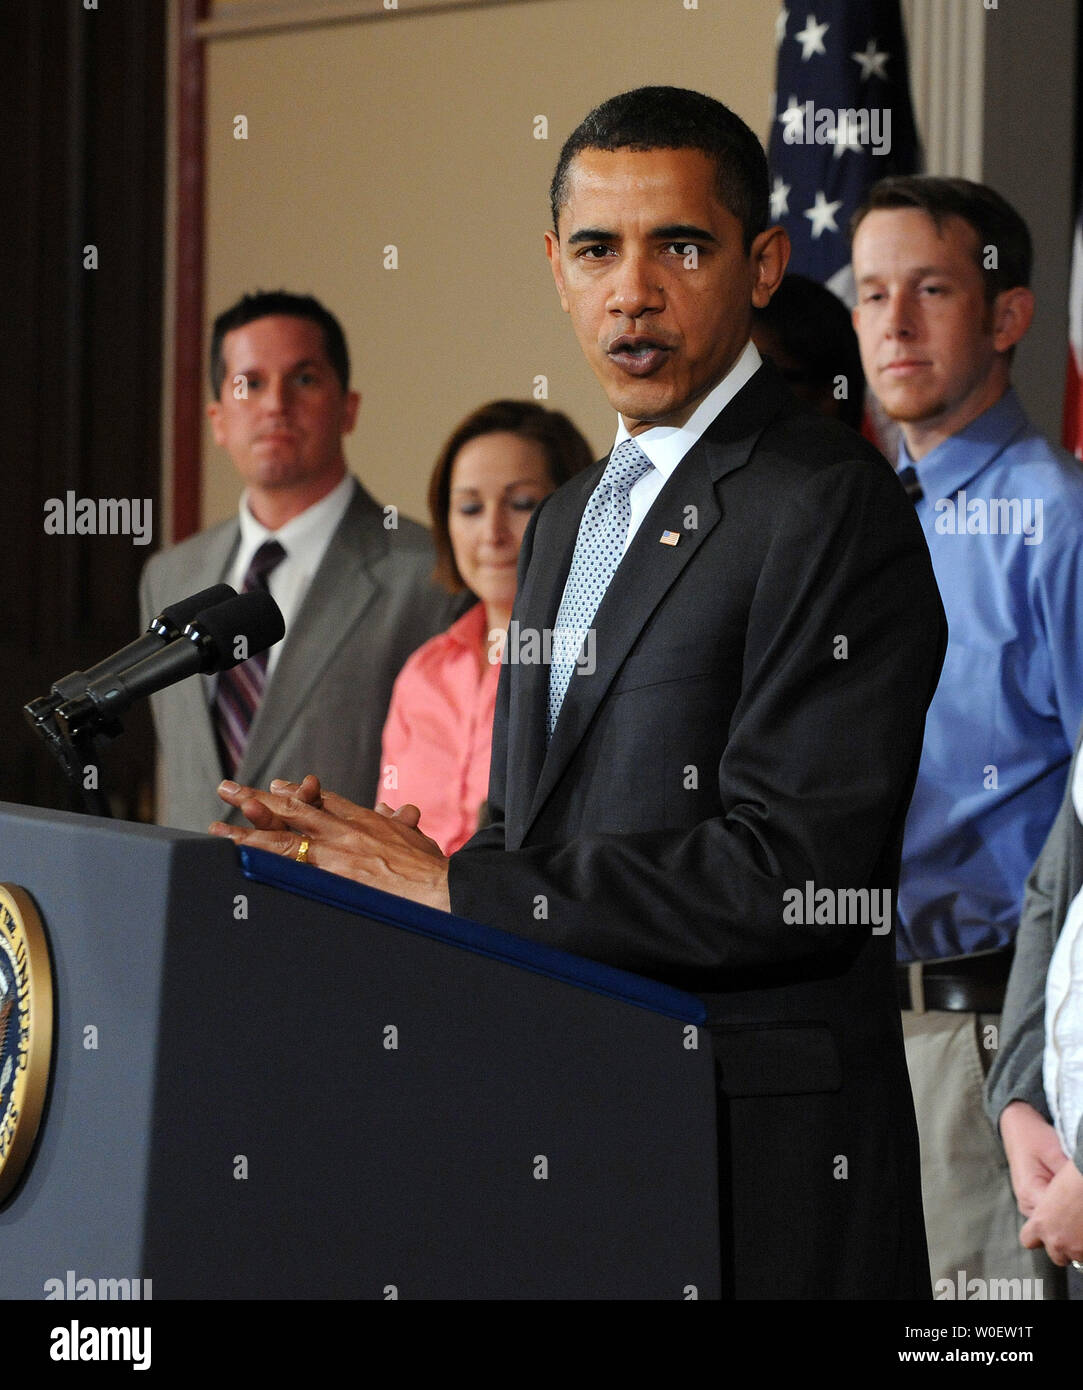 U.S. President Barack Obama speaks about Tax Day in the Eisenhower Executive Office Building adjacent to the White House on April 15, 2009. Obama said his policies reduced taxes for 95 percent of Americans and that in the future he would seek to simplify the tax code and make it more fair. With him are members of working families.   (UPI Photo/Roger L. Wollenberg) Stock Photo